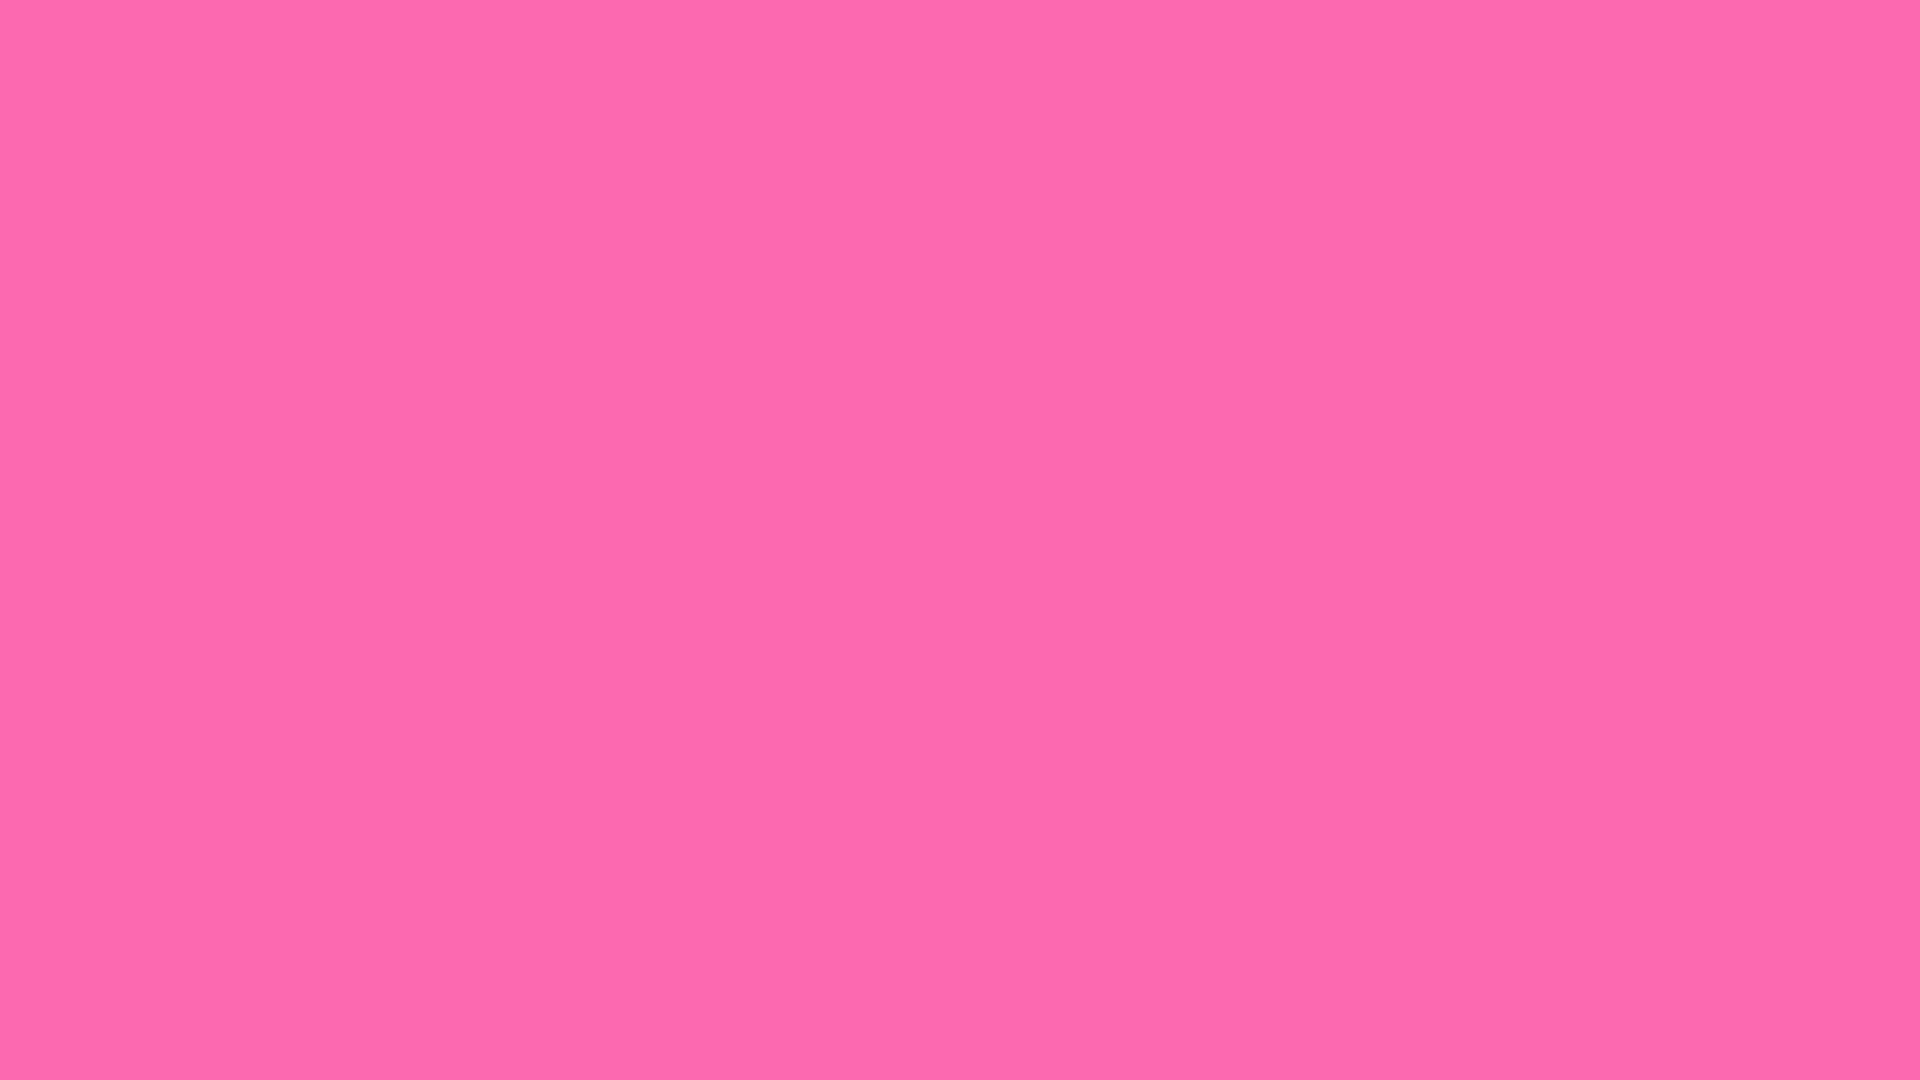 Girly Pink Solid Color Wallpaper